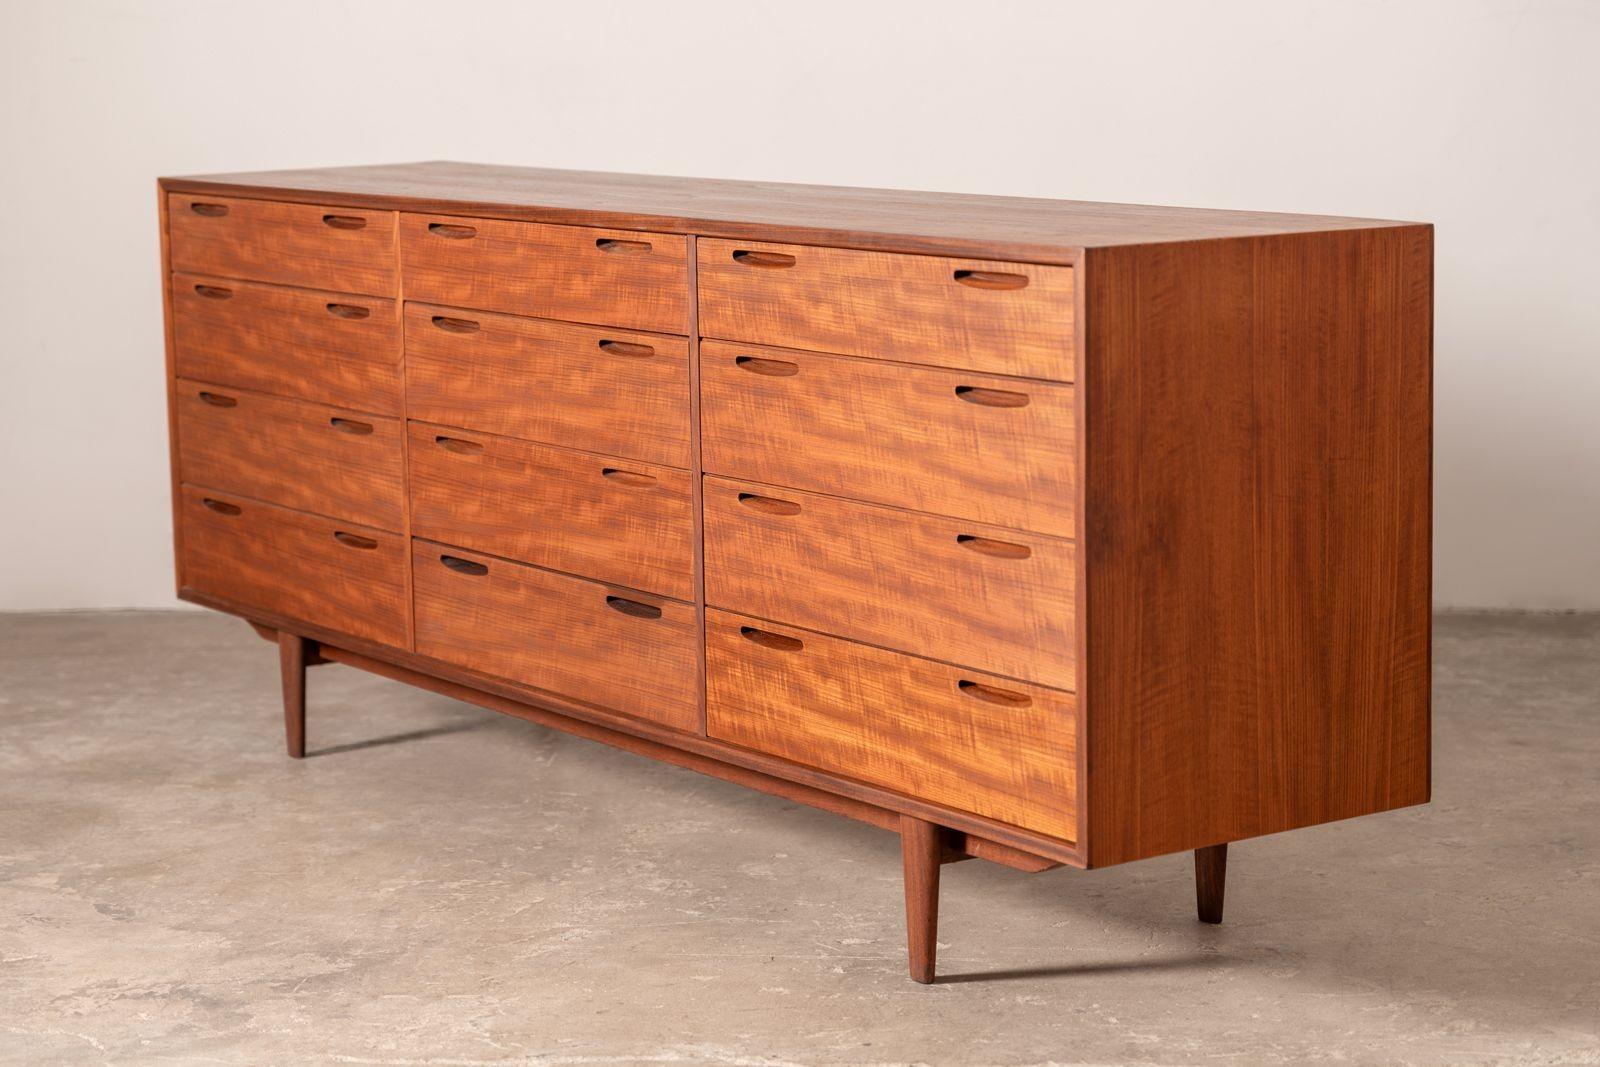 Ultra sleek twelve-drawer teak cabinet with a finished back. It can be utilized as a freestanding sideboard or would serve nicely as a dresser. Designed by Ib Kofod-Larsen and crafted of teak in Denmark by Brande Mobelfabrik.